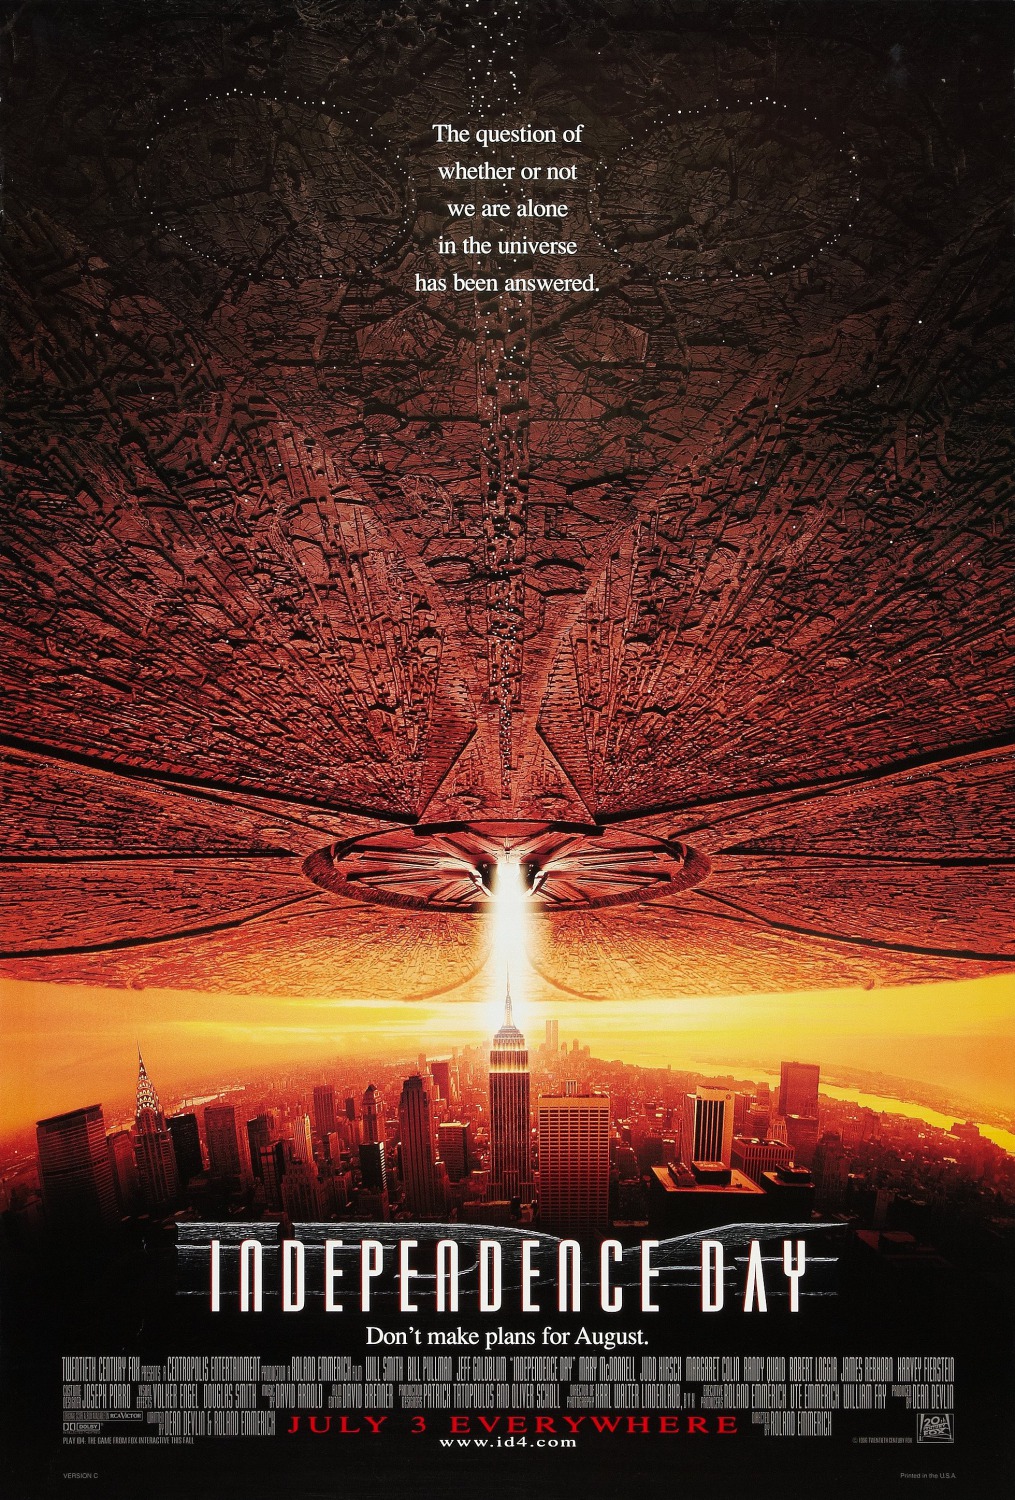 Extra Large Movie Poster Image for Independence Day (#3 of 4)